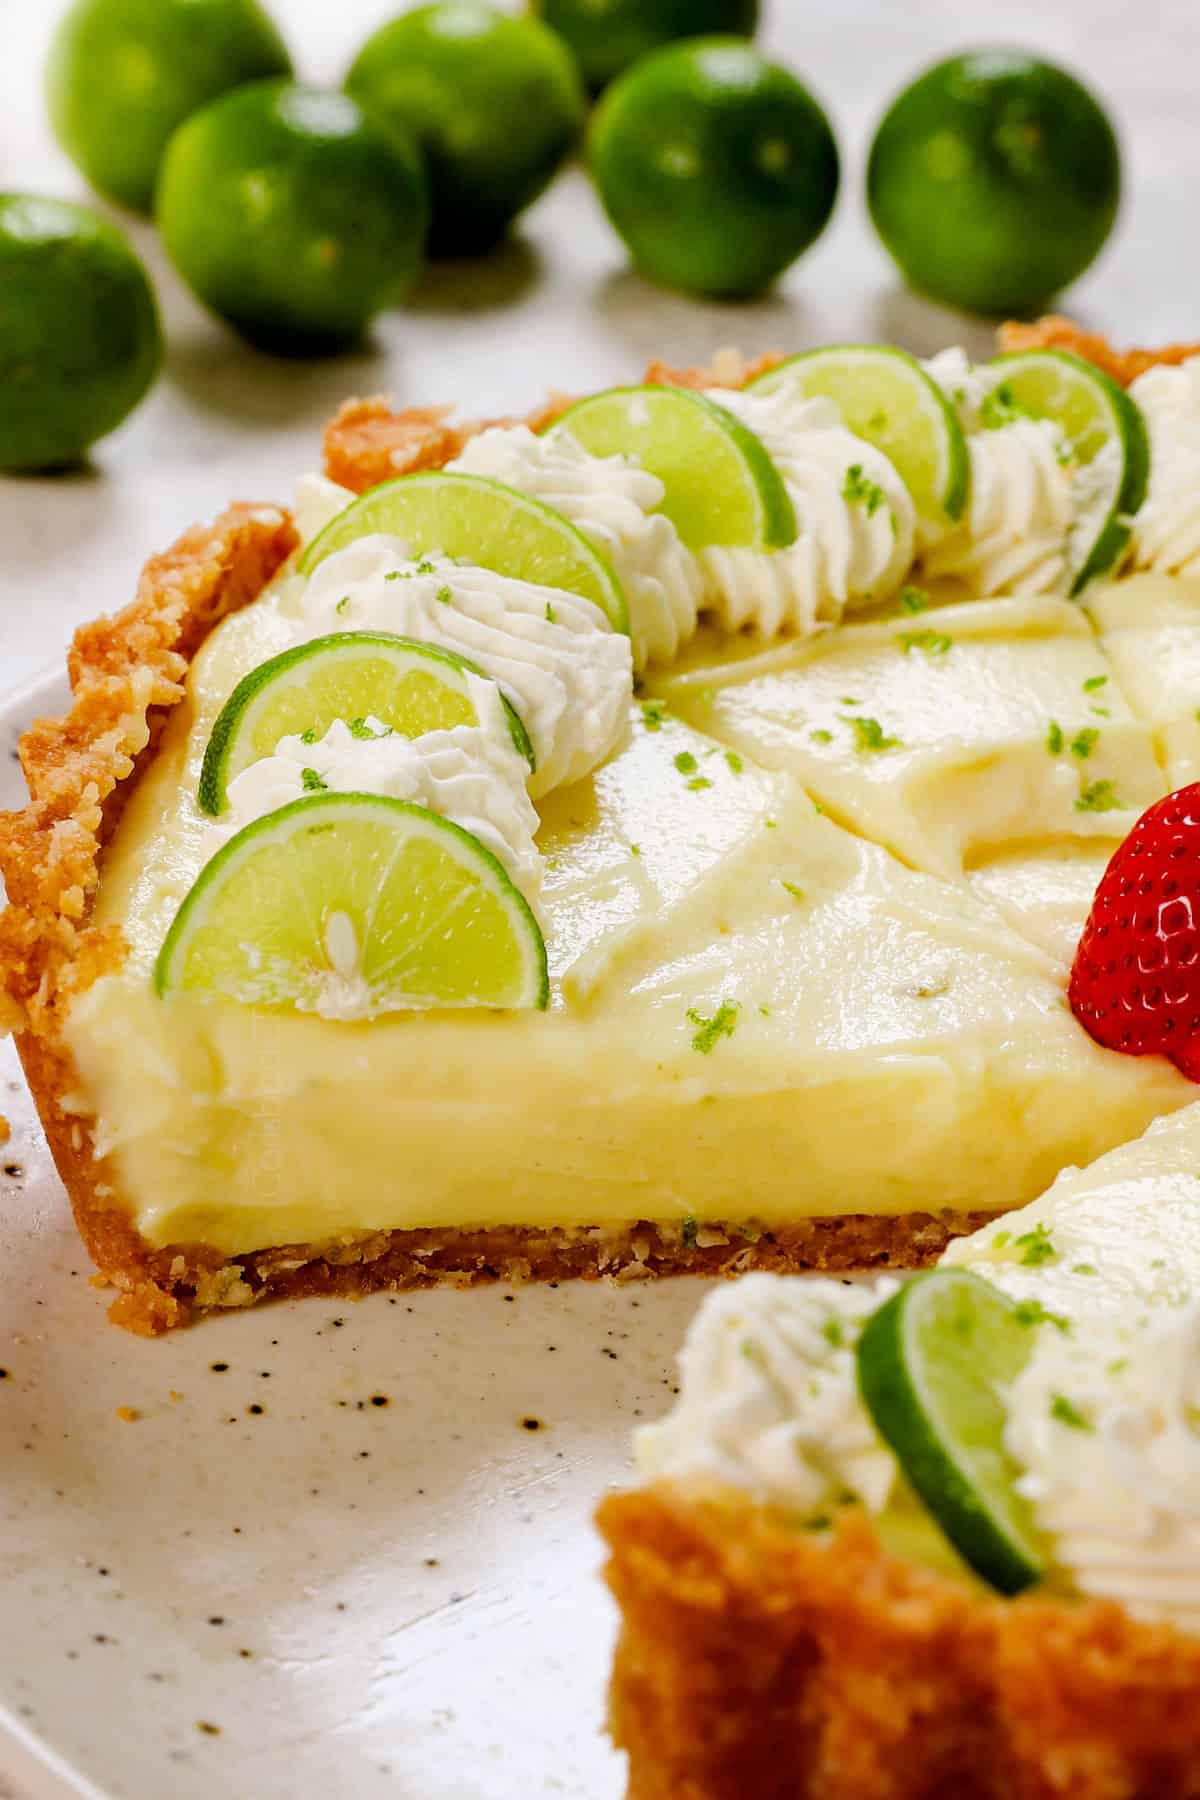 a slice of homemade key lime pie showing the custard-like filling that's thick and stable and not runny